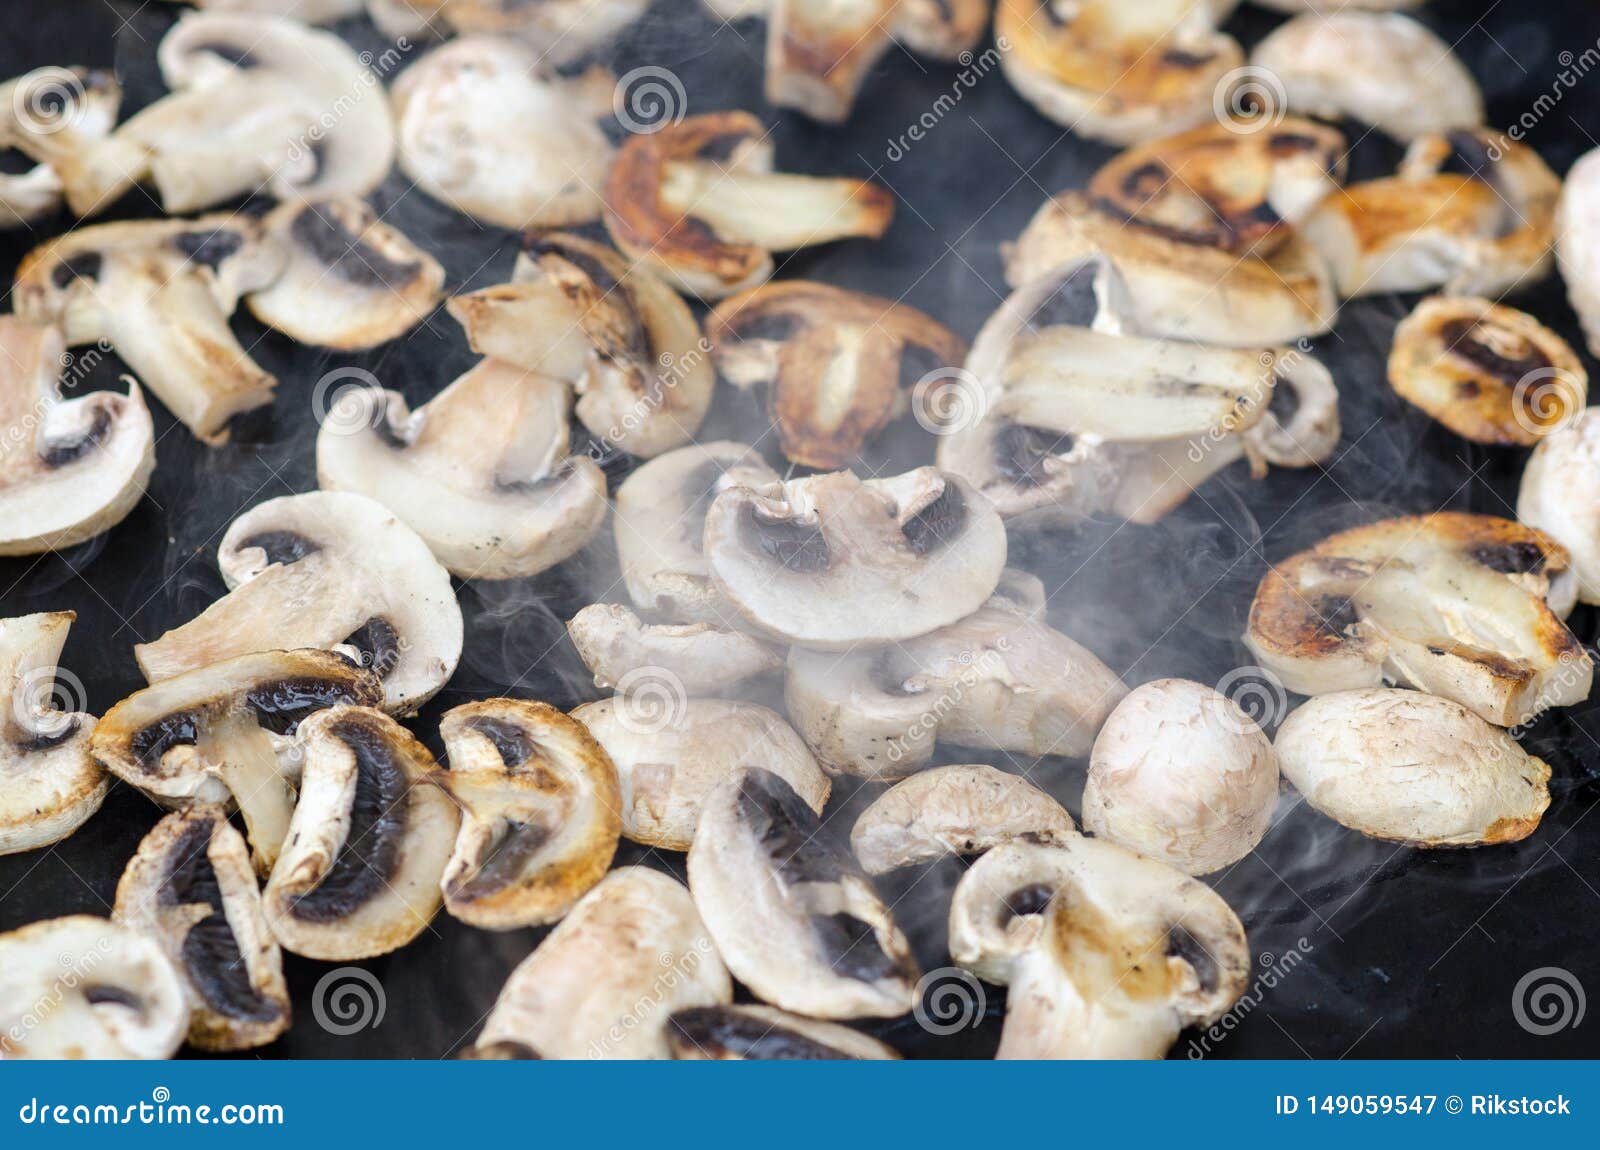 cooking grilled mushrooms champignons, they are a party food